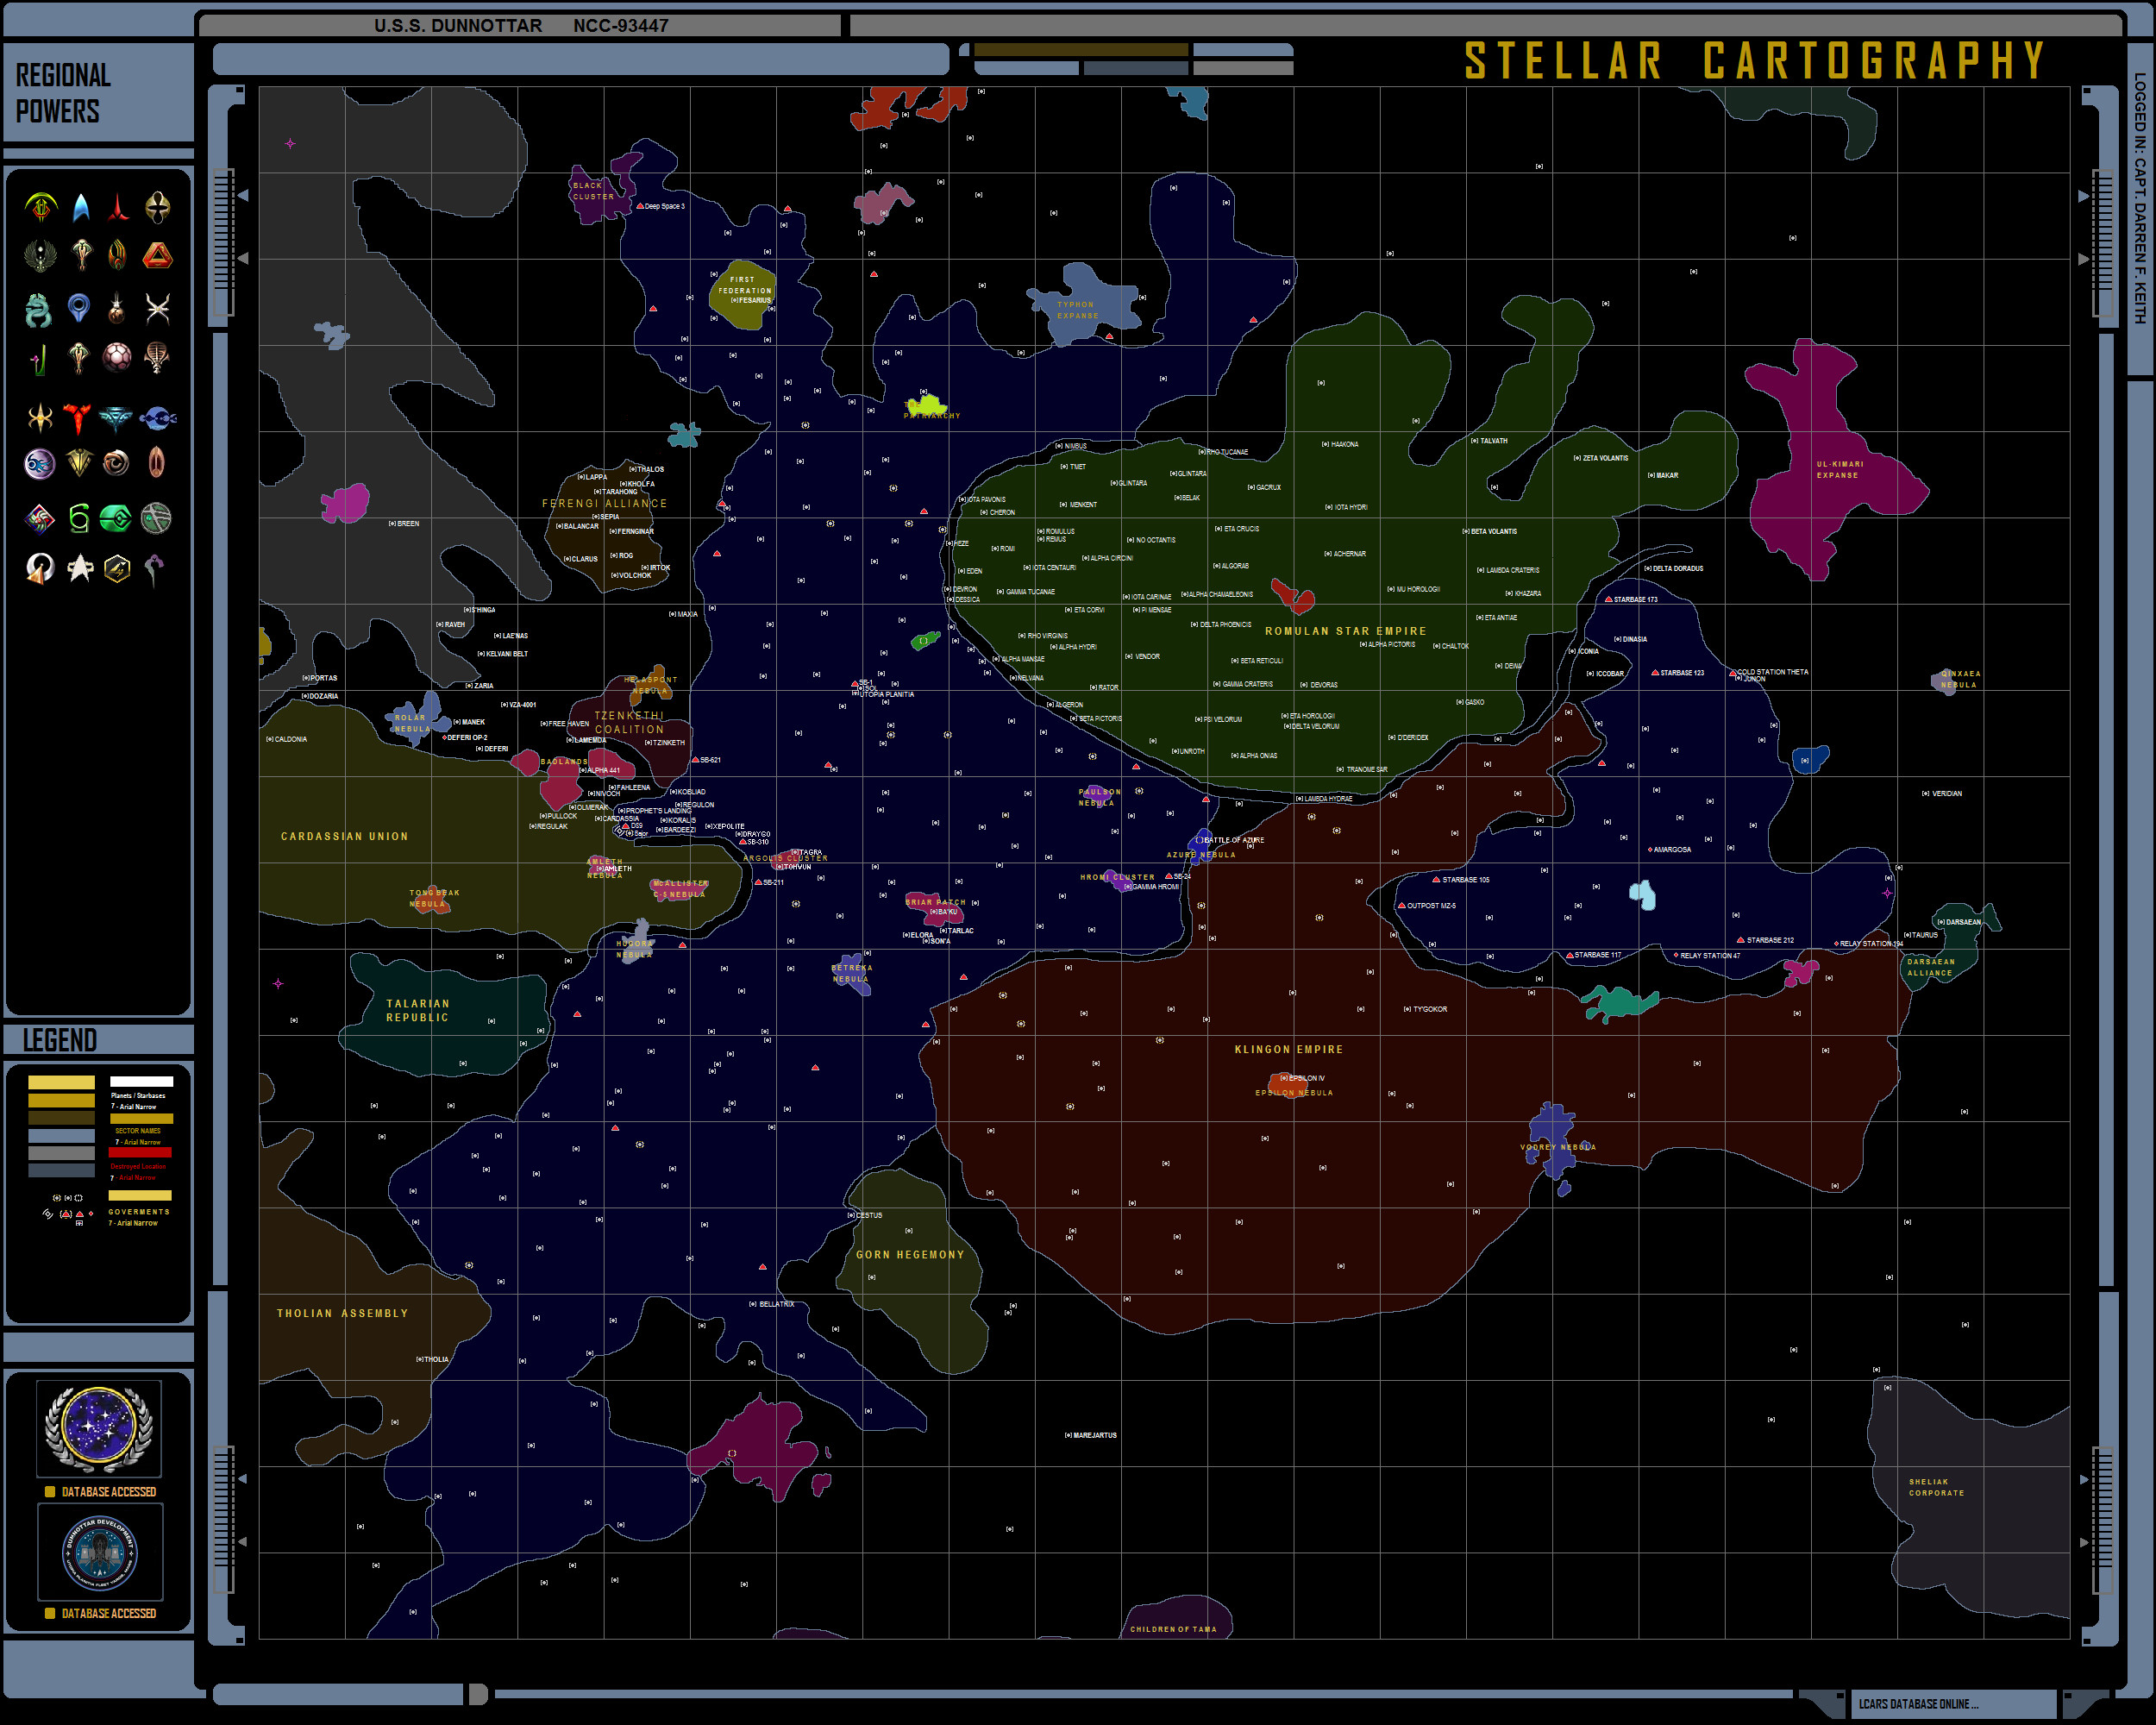 LCARS PADD Stellar Cartography WiP 2.4 by DKeith357